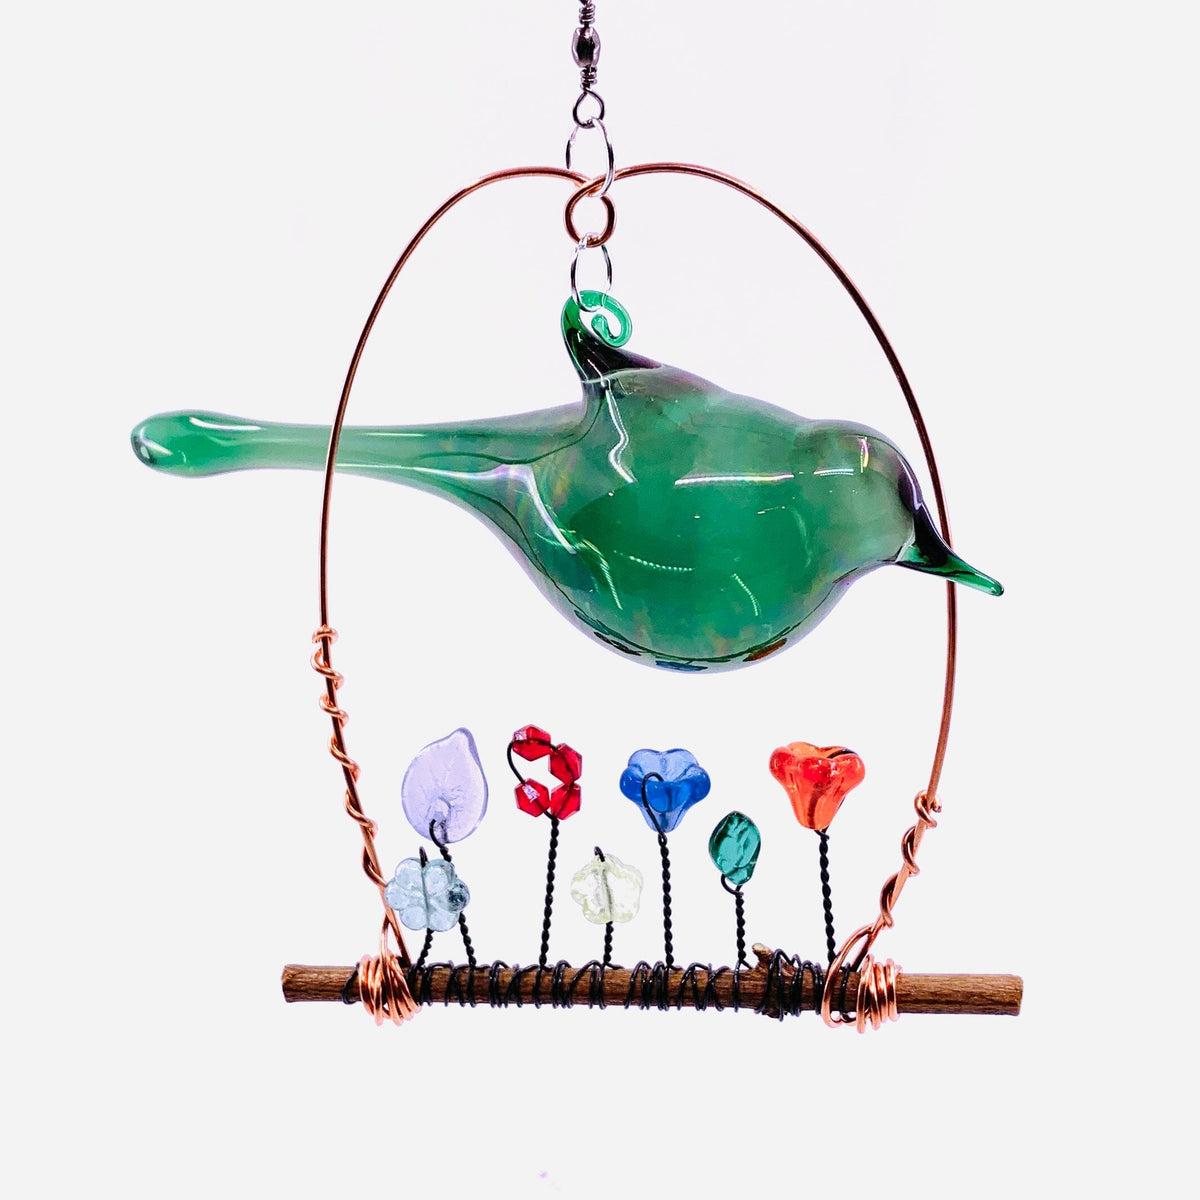 Hand Blown Glass Bird Wired Flower Garden Swing 4, Green Decor Whimsical Wire and Glass 